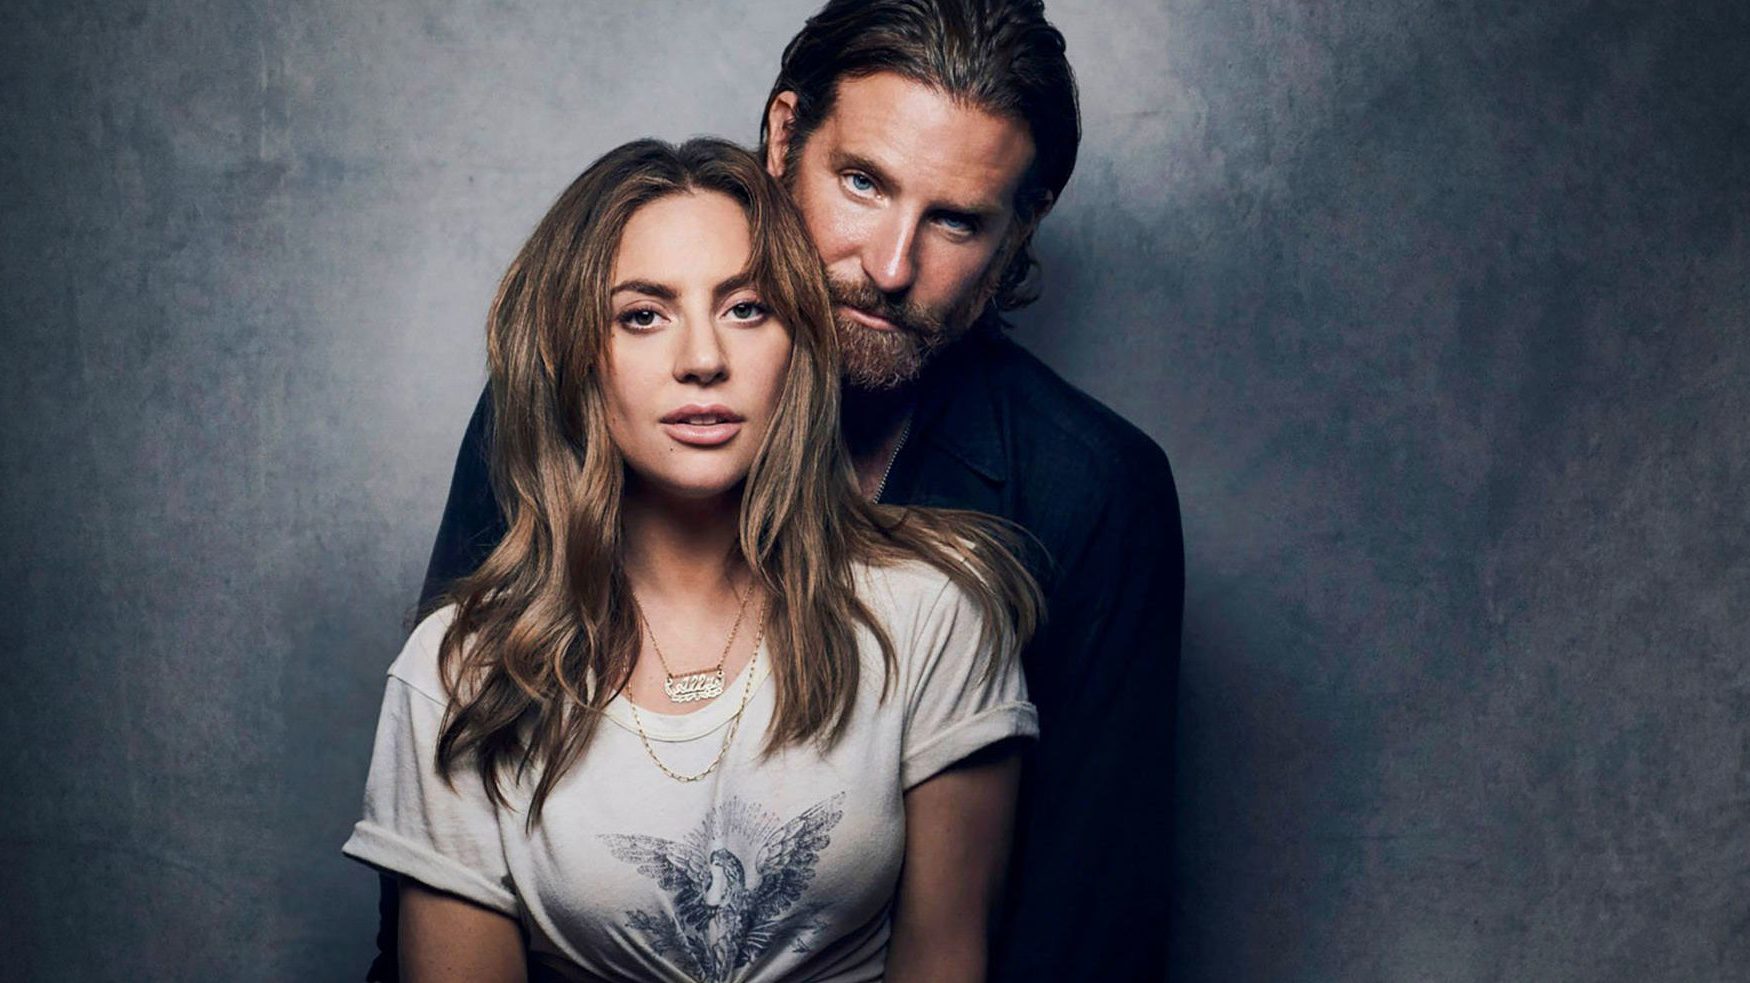 Lady Gaga Bradley Cooper Dating Rumors Star Is Born Couple To Reunite With Cleopatra Film